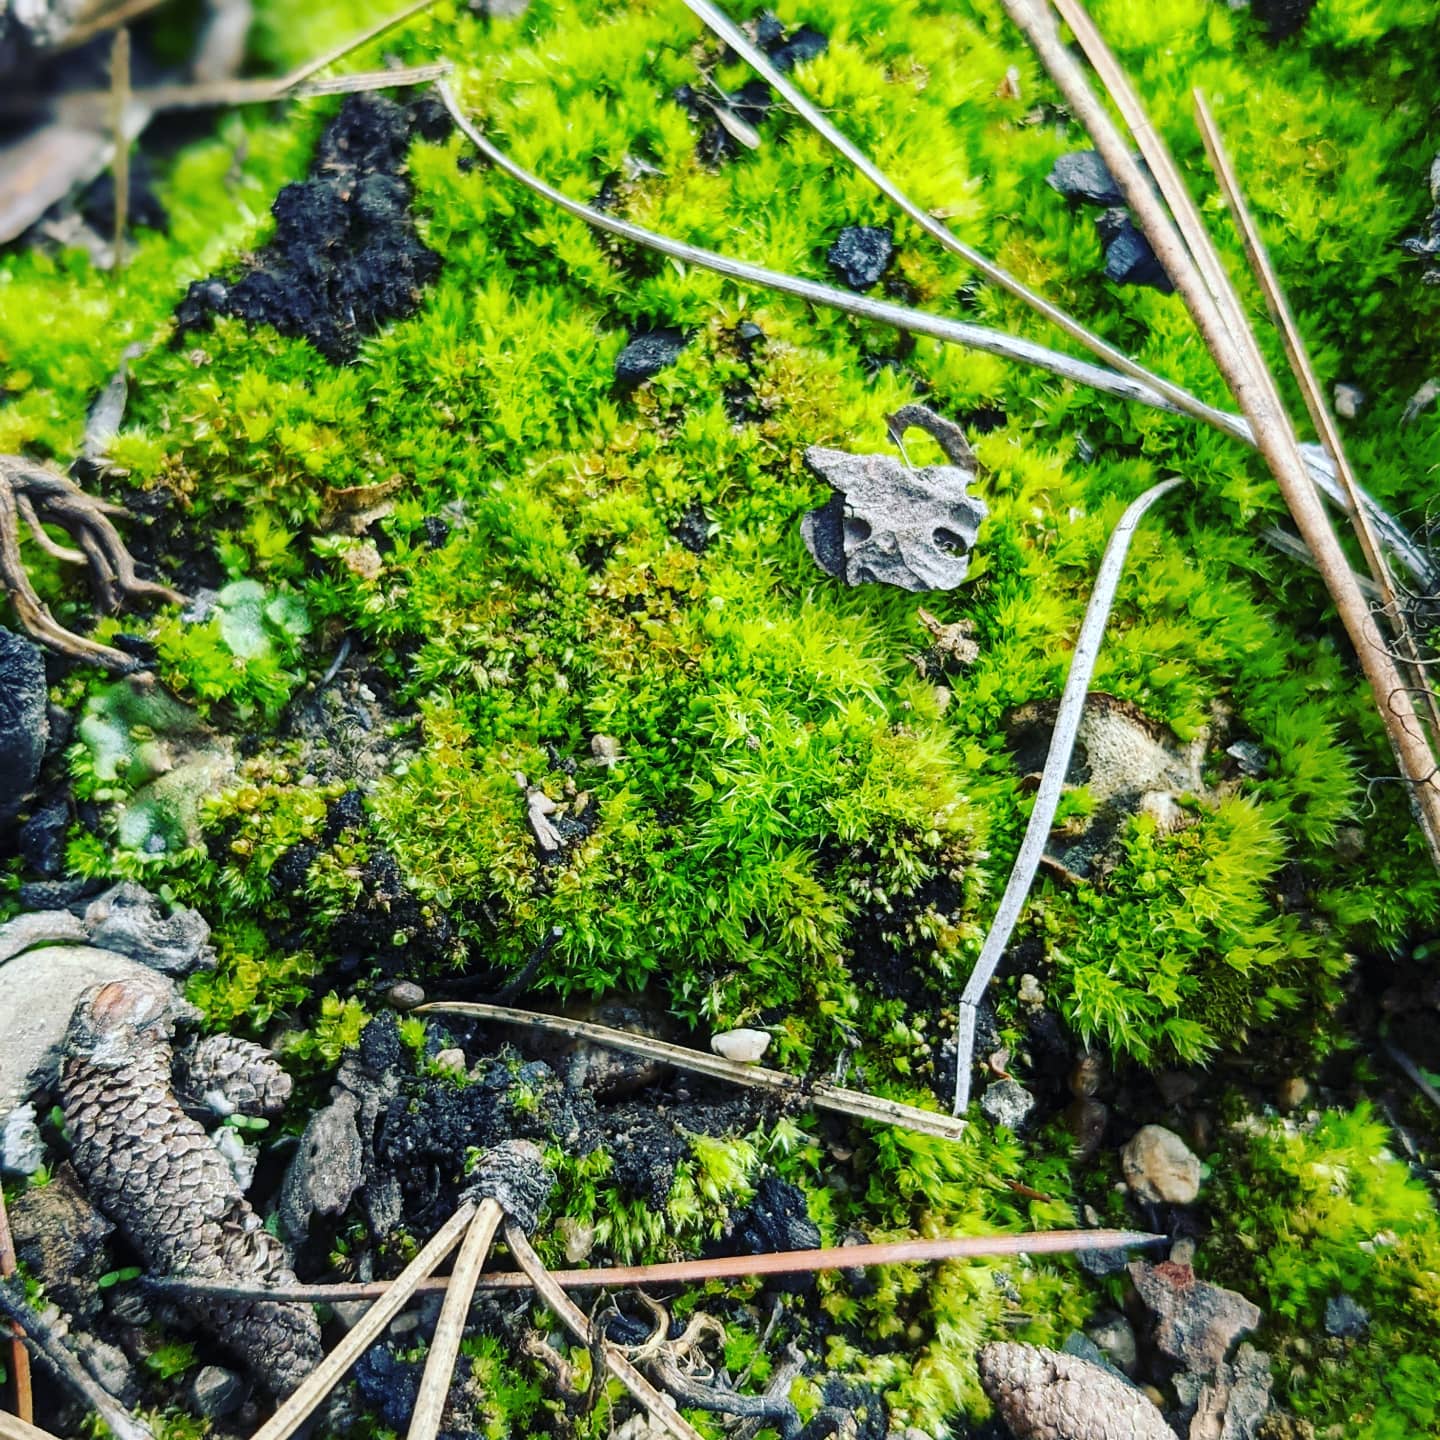 Moss colonizing a recently burned area